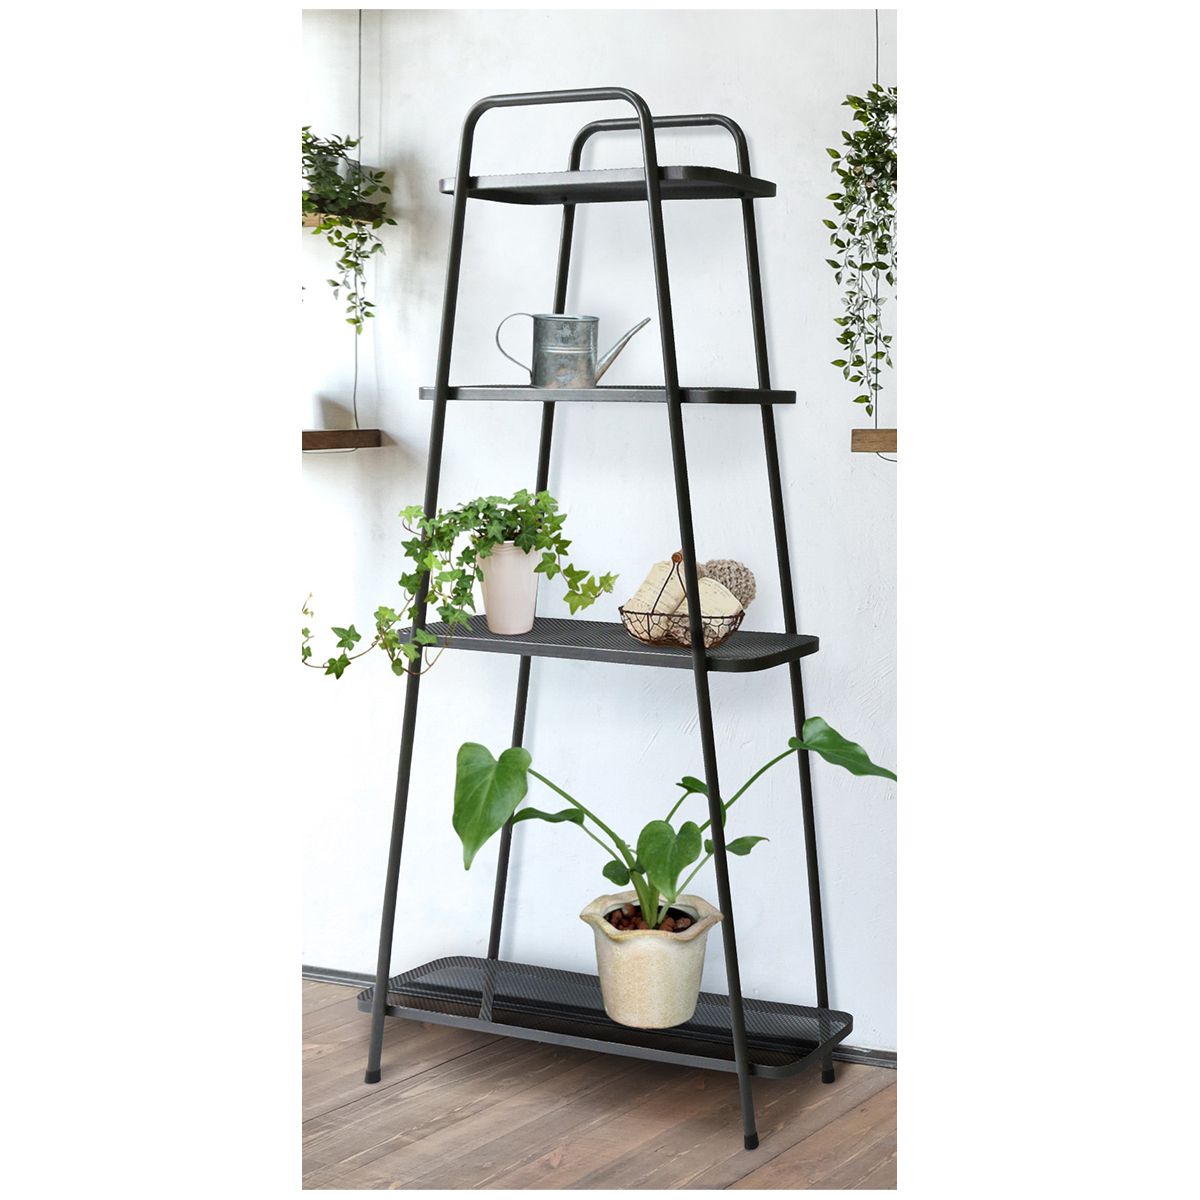 Takasho 4 Tier Modern Plant Stand | Costco Australia For 4 Tier Plant Stands (View 14 of 15)